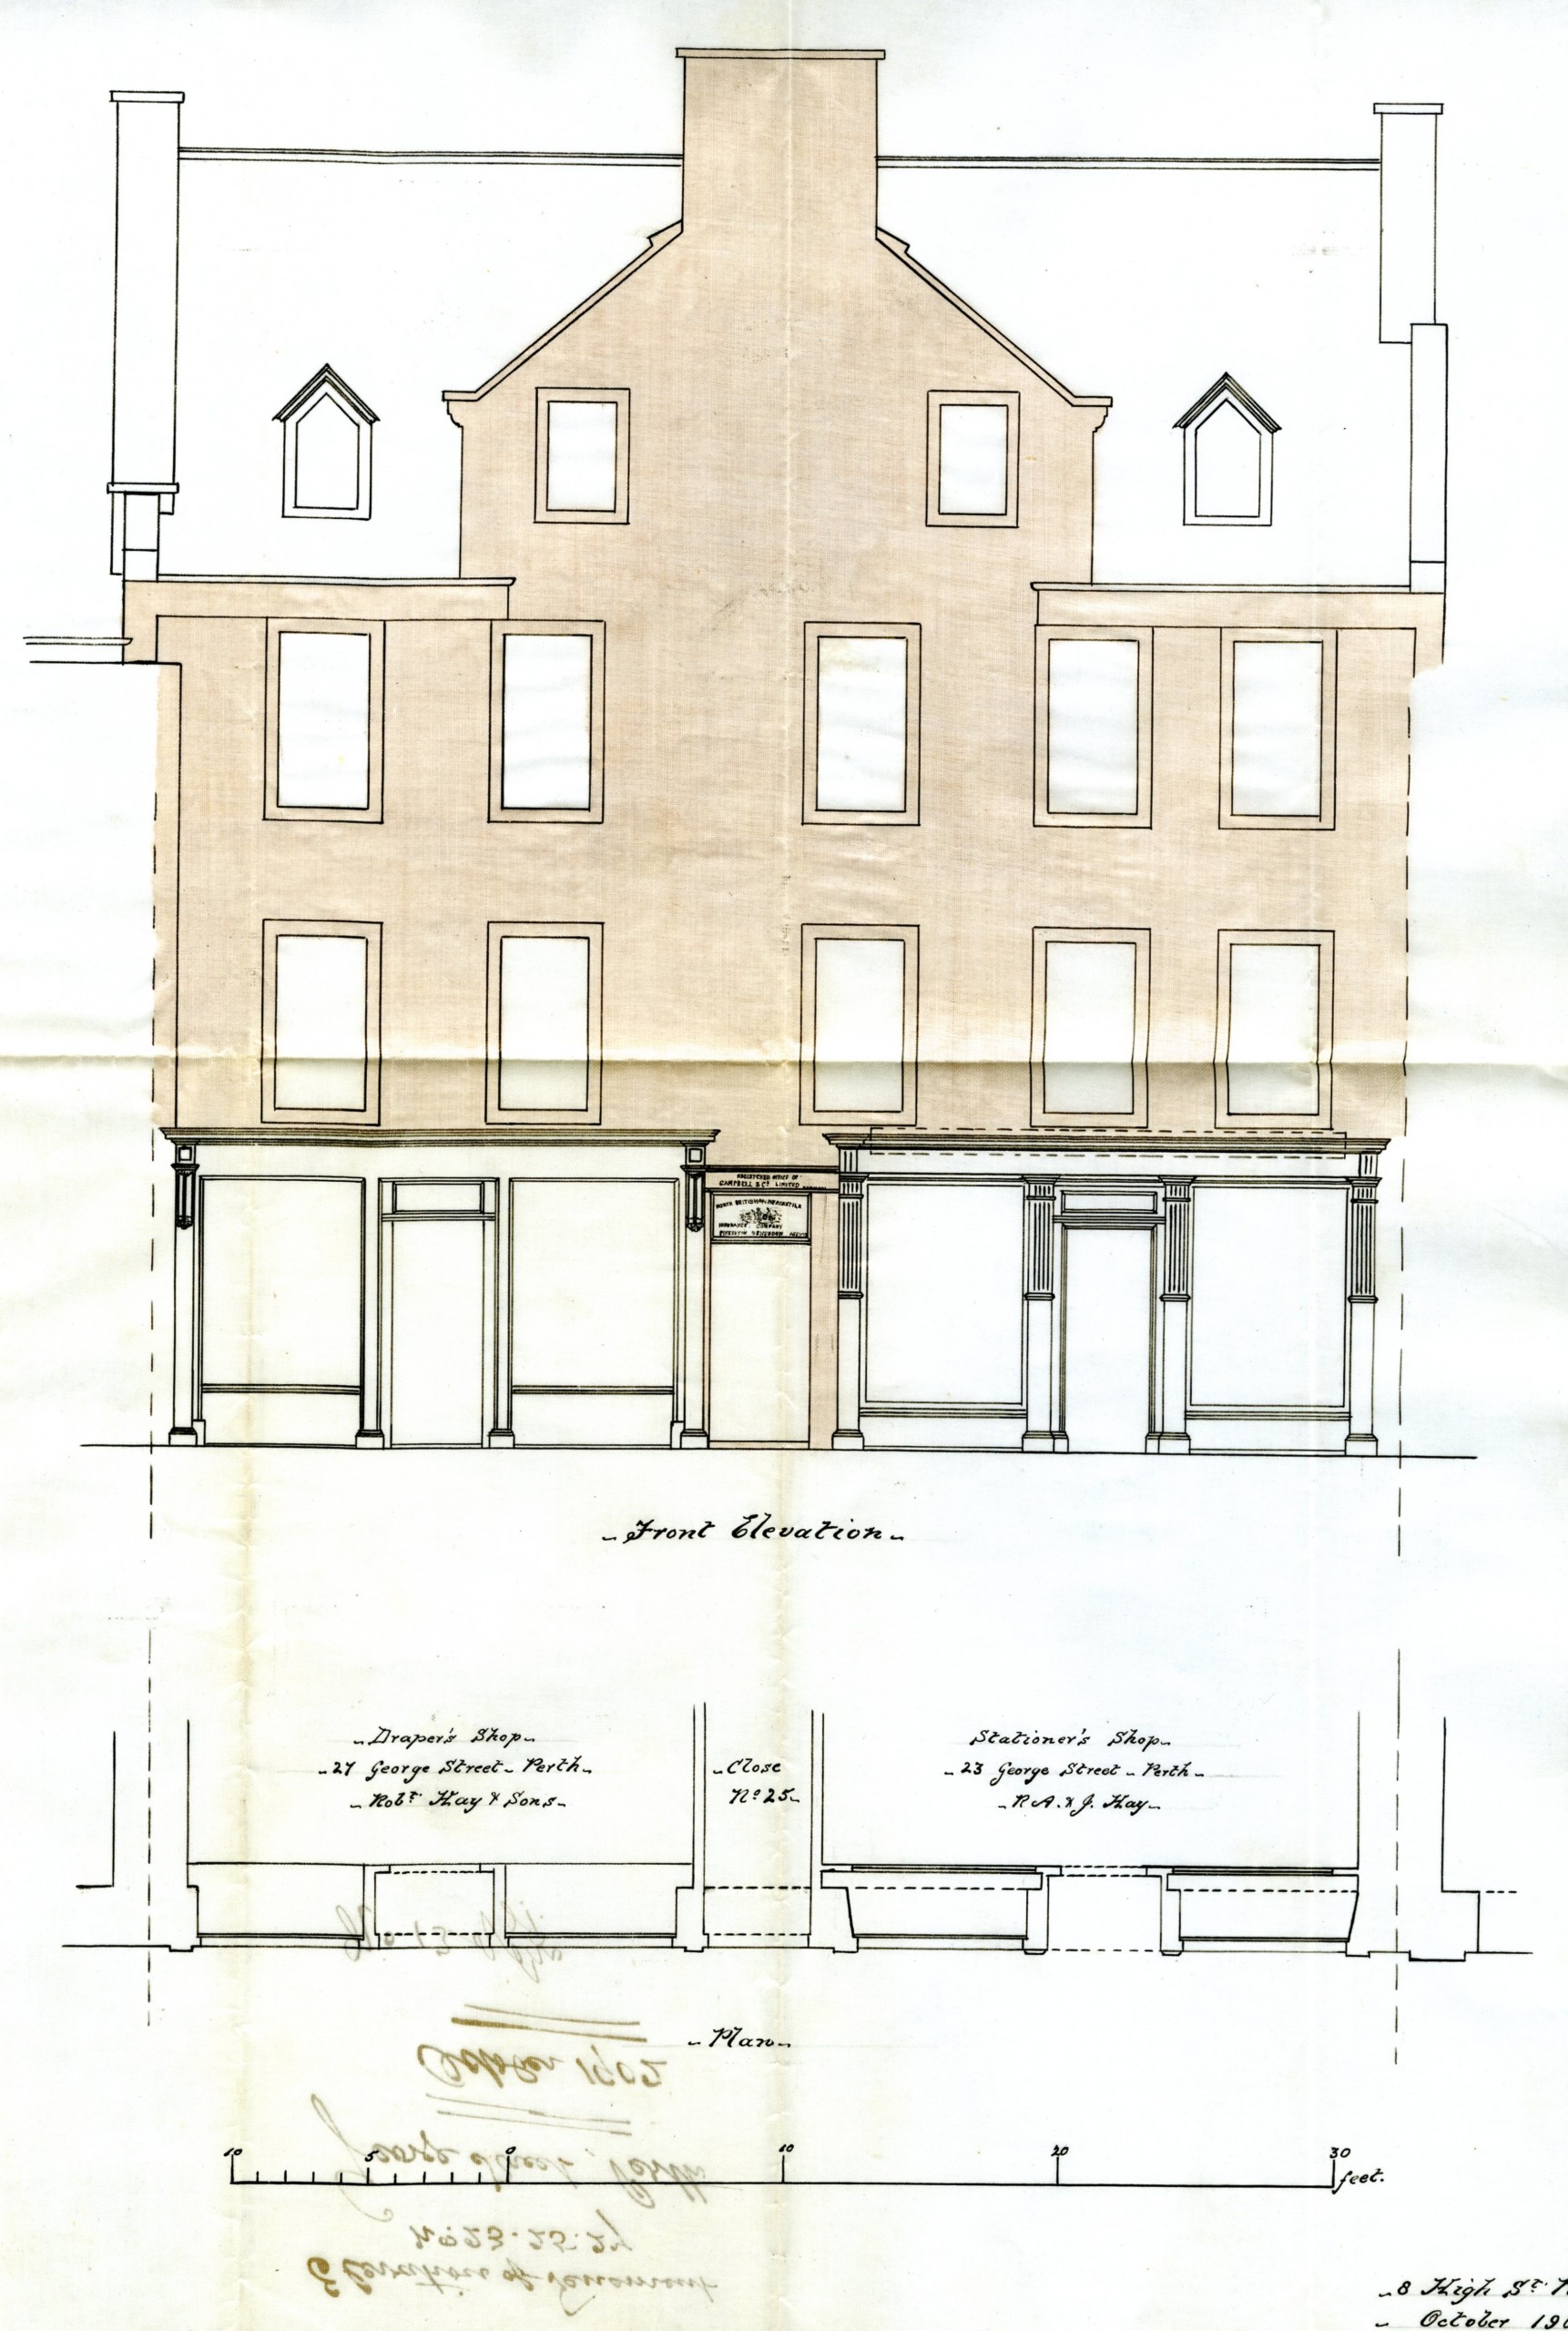 Dean of Guilds drawing of 27 George Street